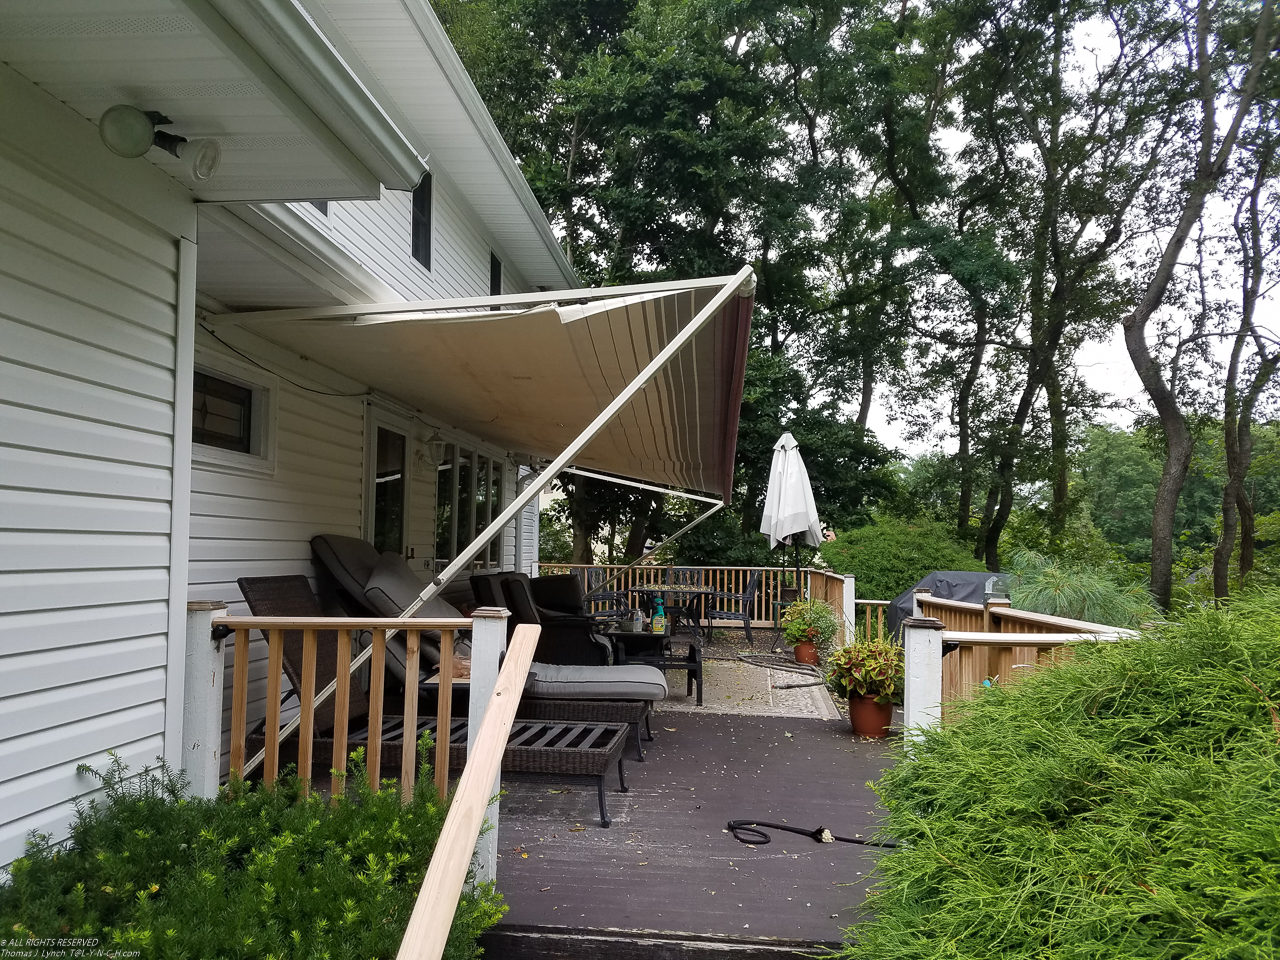 July Project 2017  ~~  30 yr old sunsetter awning from previous owner.  I broke 3 fingers trying to repair this thing after Sandy fill it with a few hundred gallons of water.  Bent the Roller.